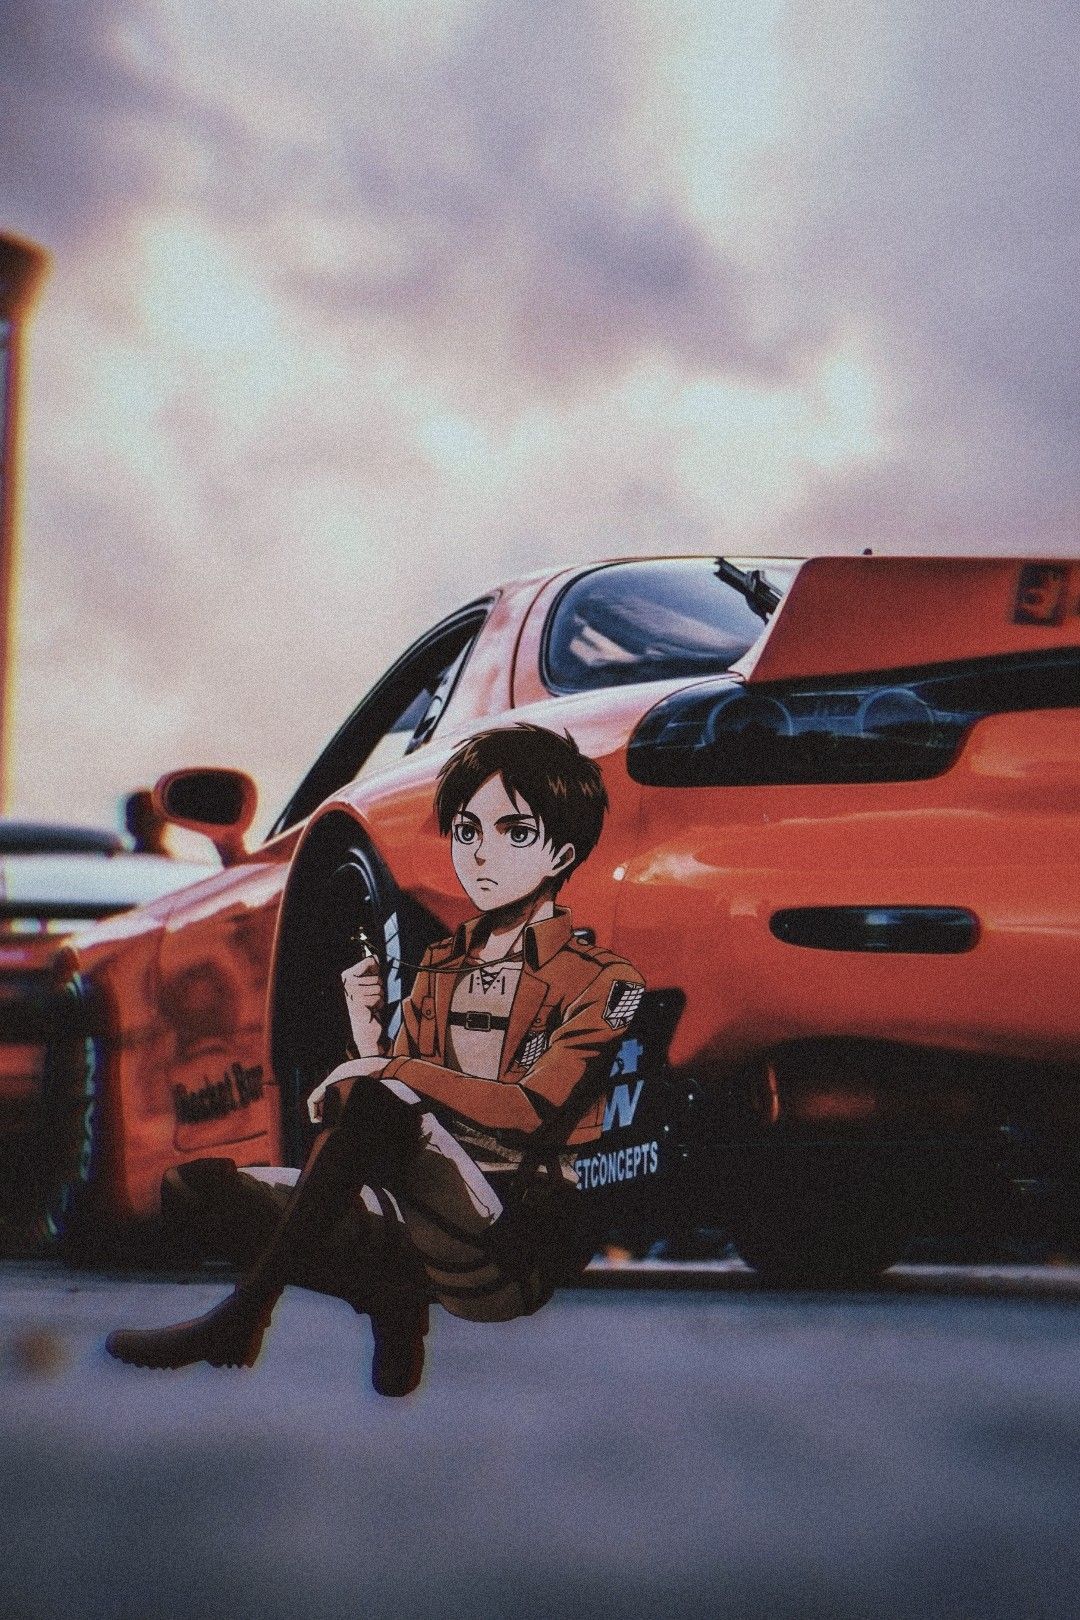 A Collection of JDM X ANIME WALLPAPER MADE BY ME. Anime wallpaper, Anime, Anime wallpaper live